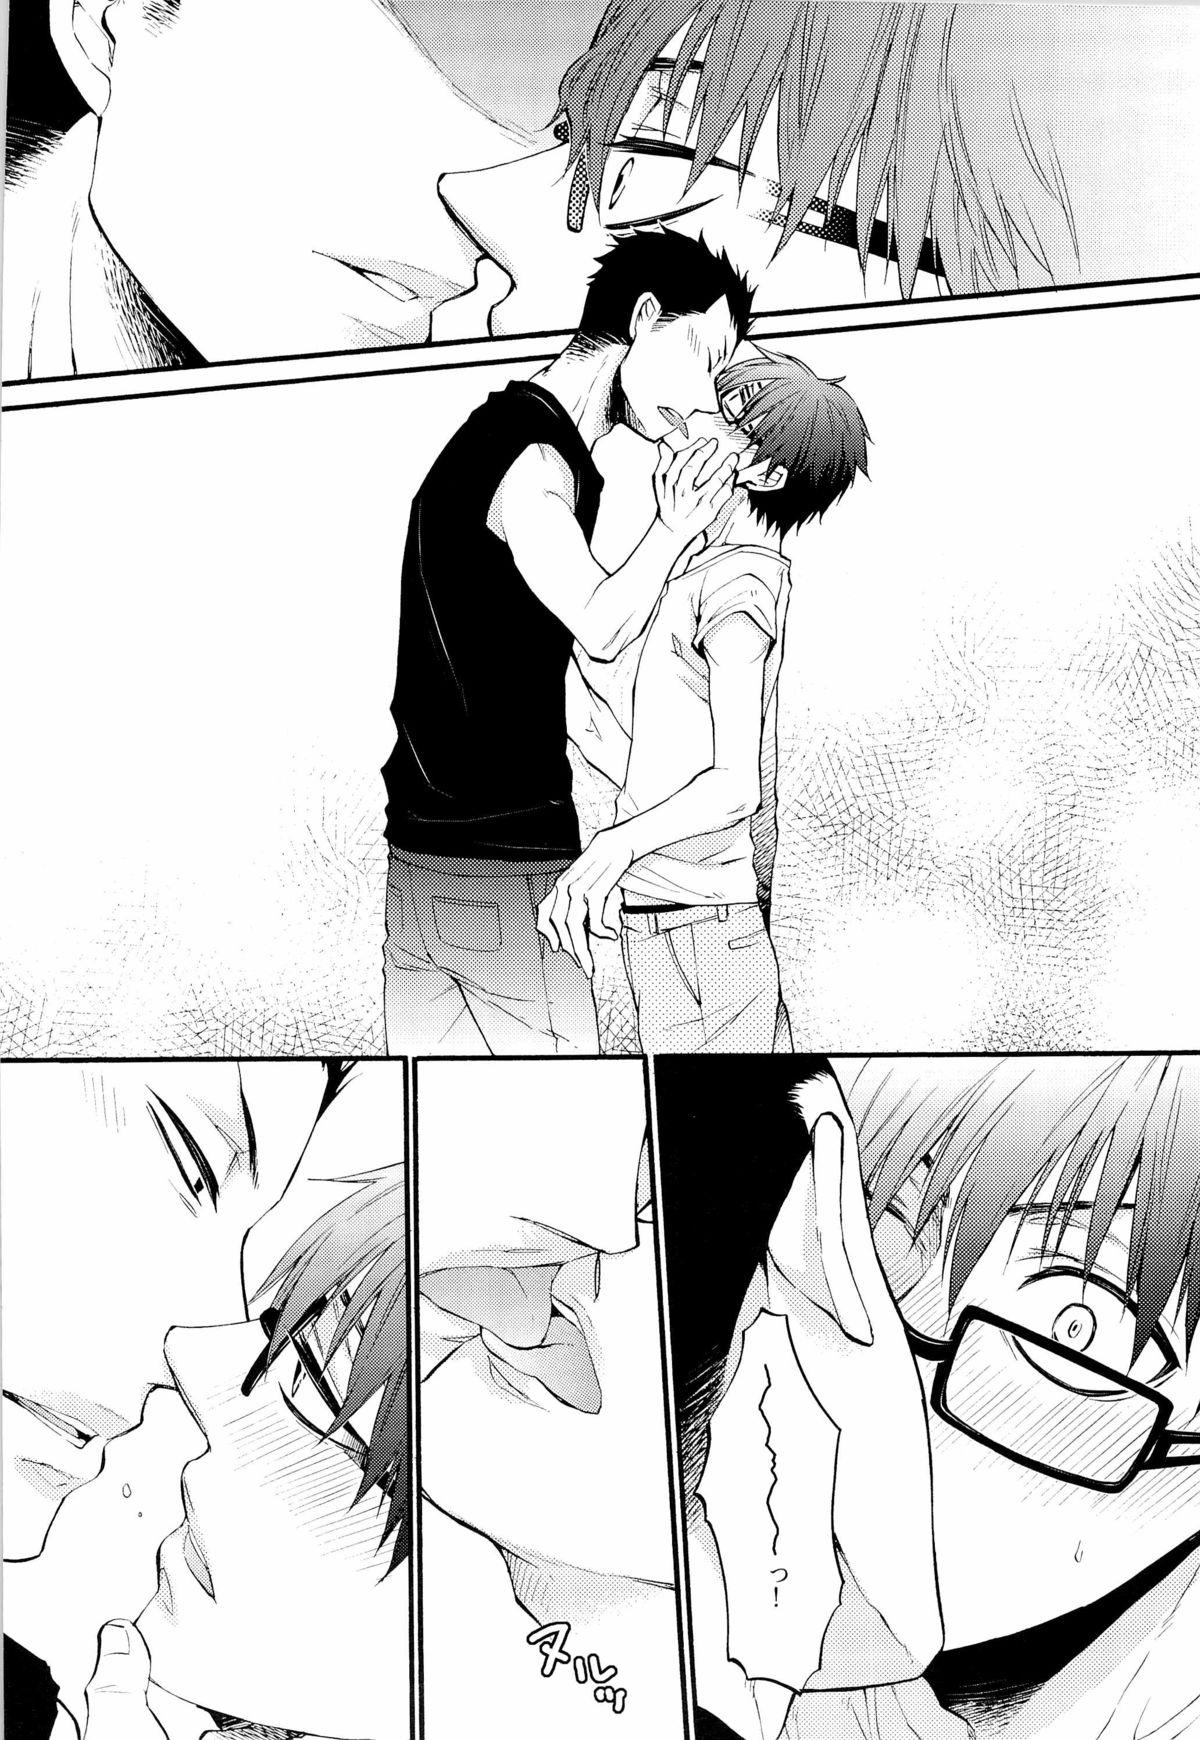 Fucks AFTER TASTE - Silver spoon Slapping - Page 10